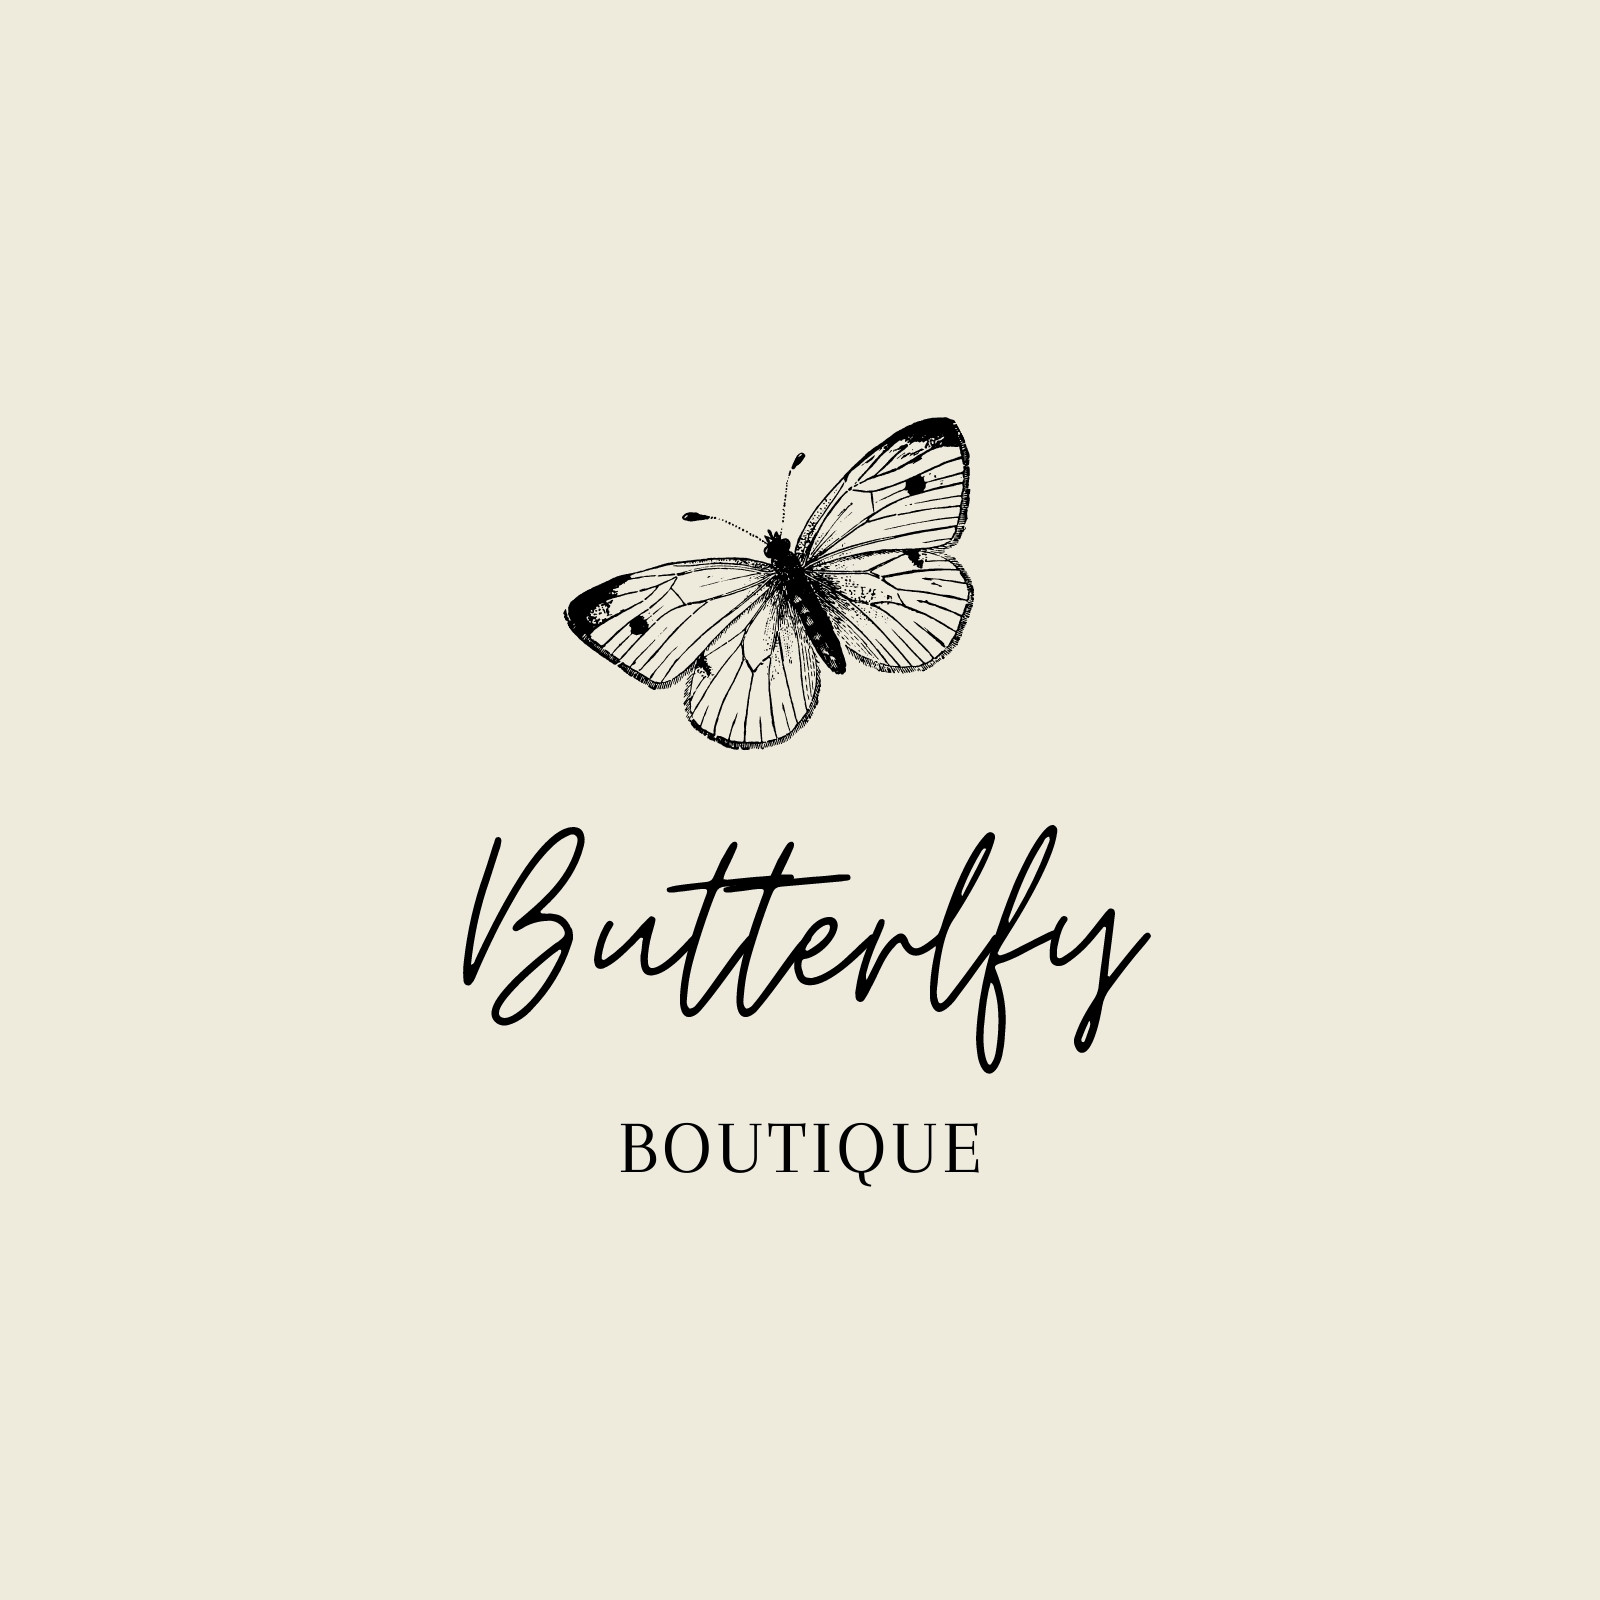 Butterfly logo design template Royalty Free Vector Image